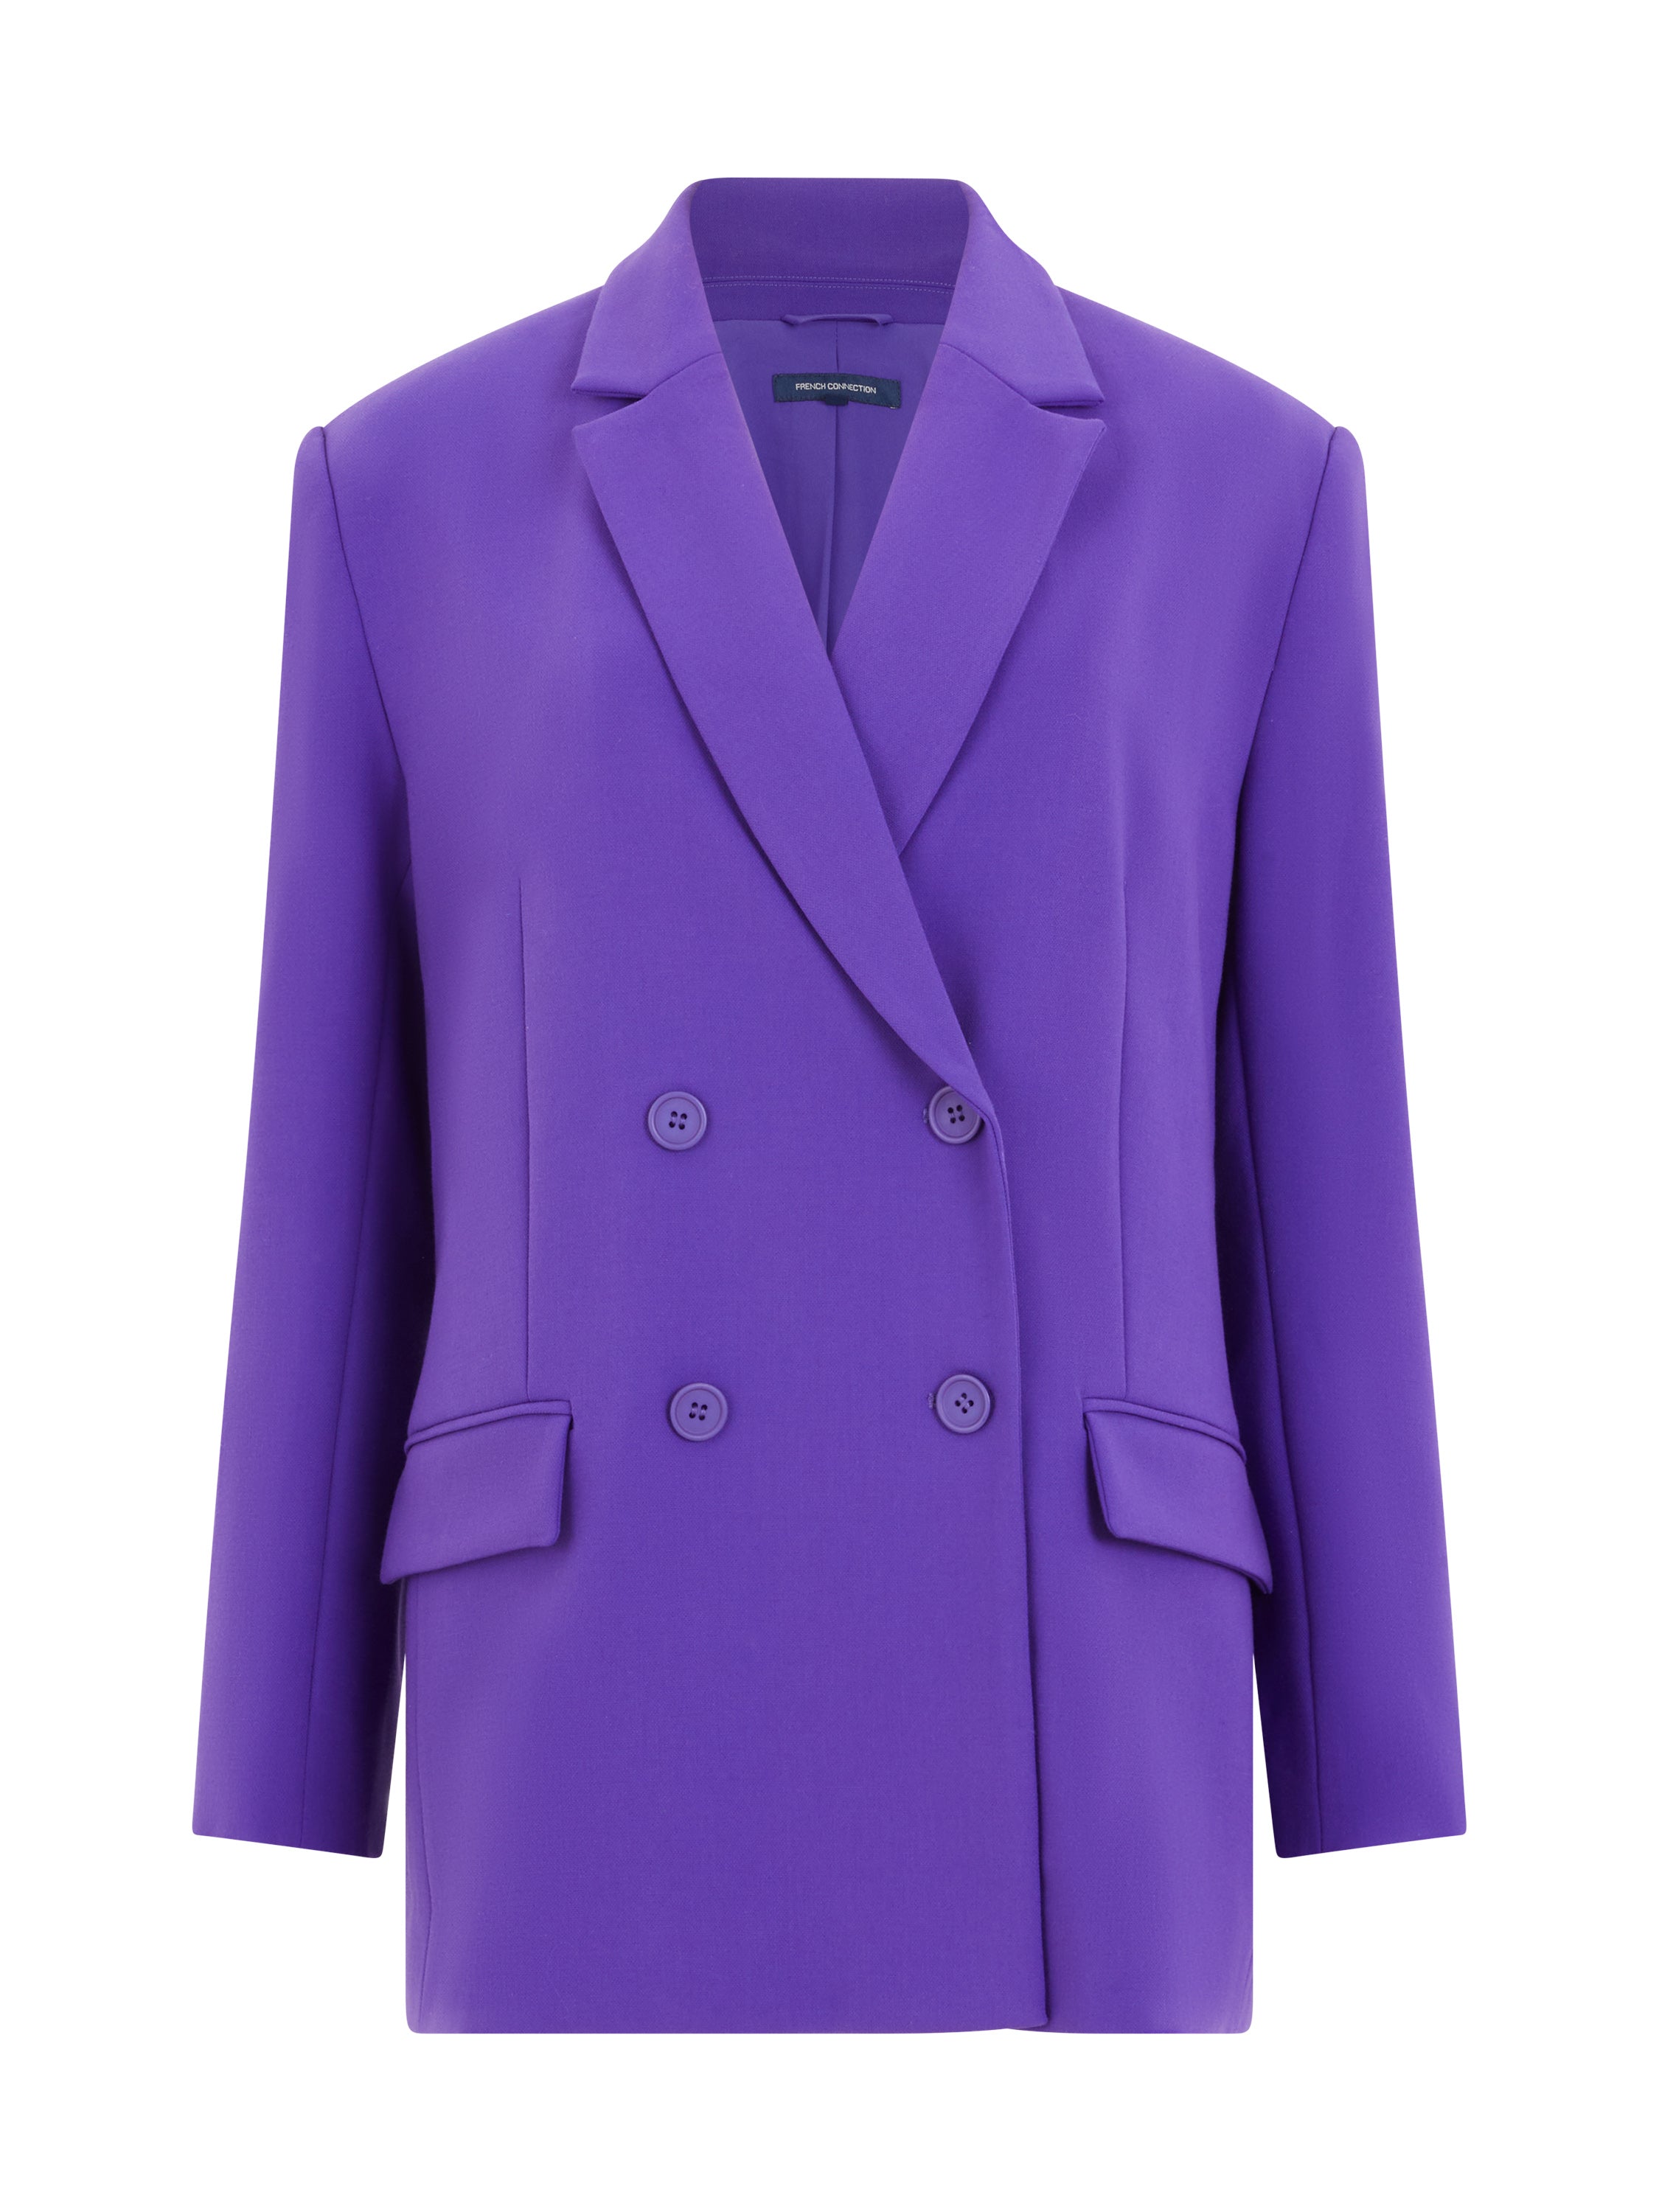 Breasted French Violet Whisper Double US Cobalt Blazer | Connection